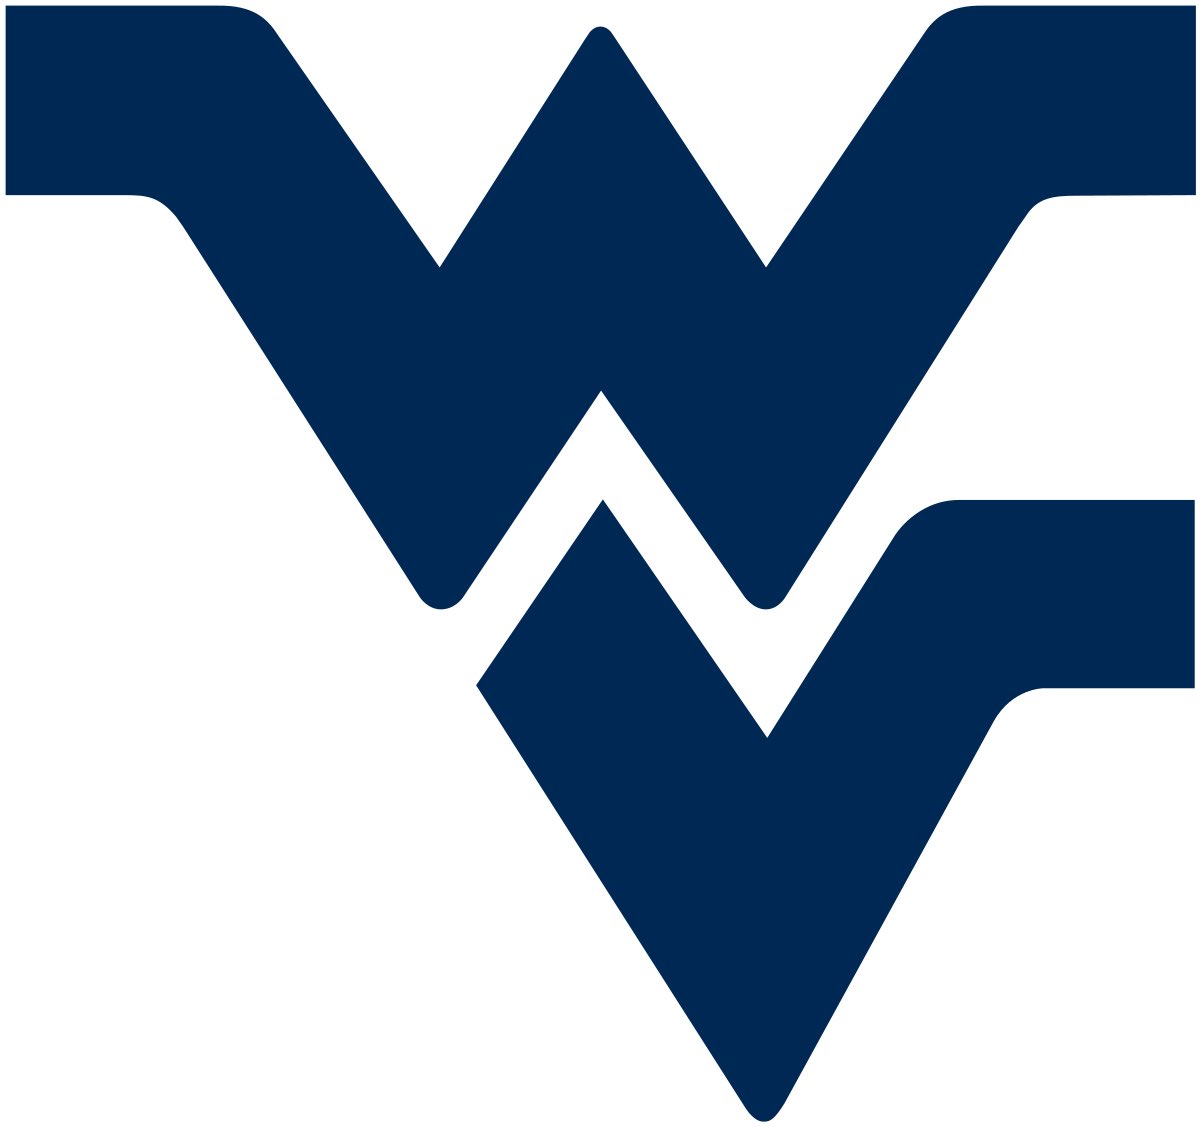 Thank you @WVUfootball for visiting!!